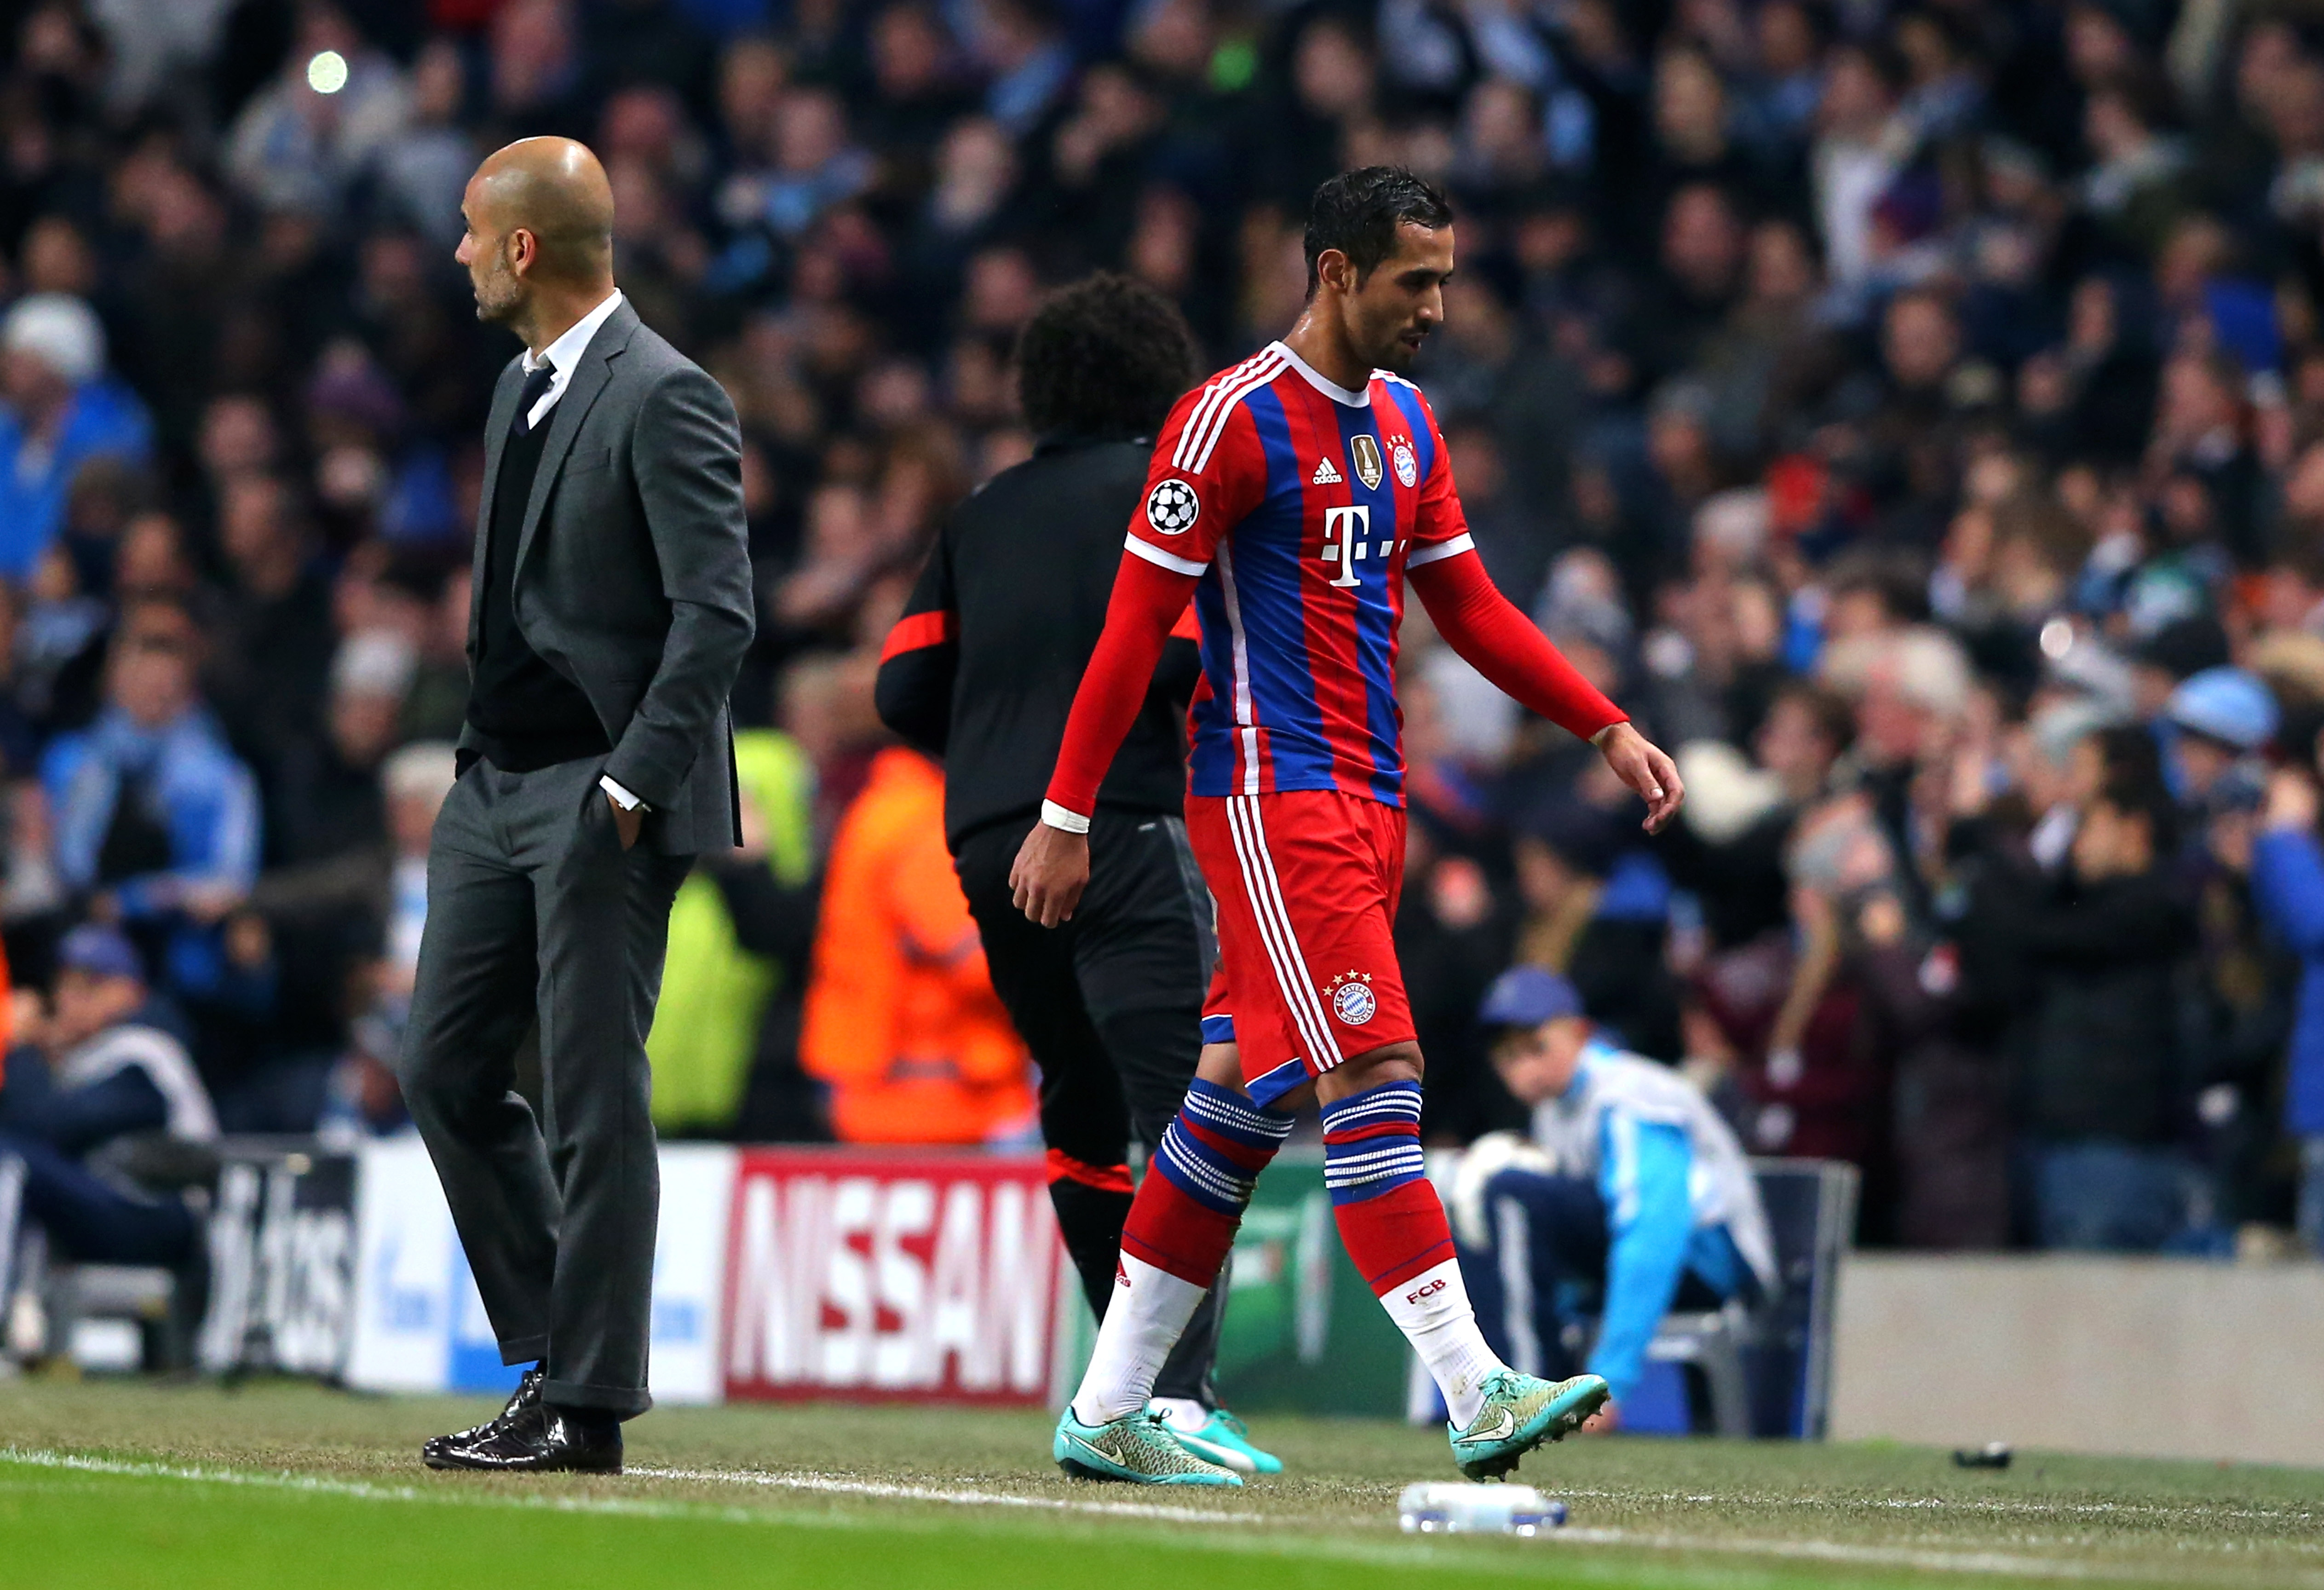 Why Guardiola does not communicate with his players, explains Benatia